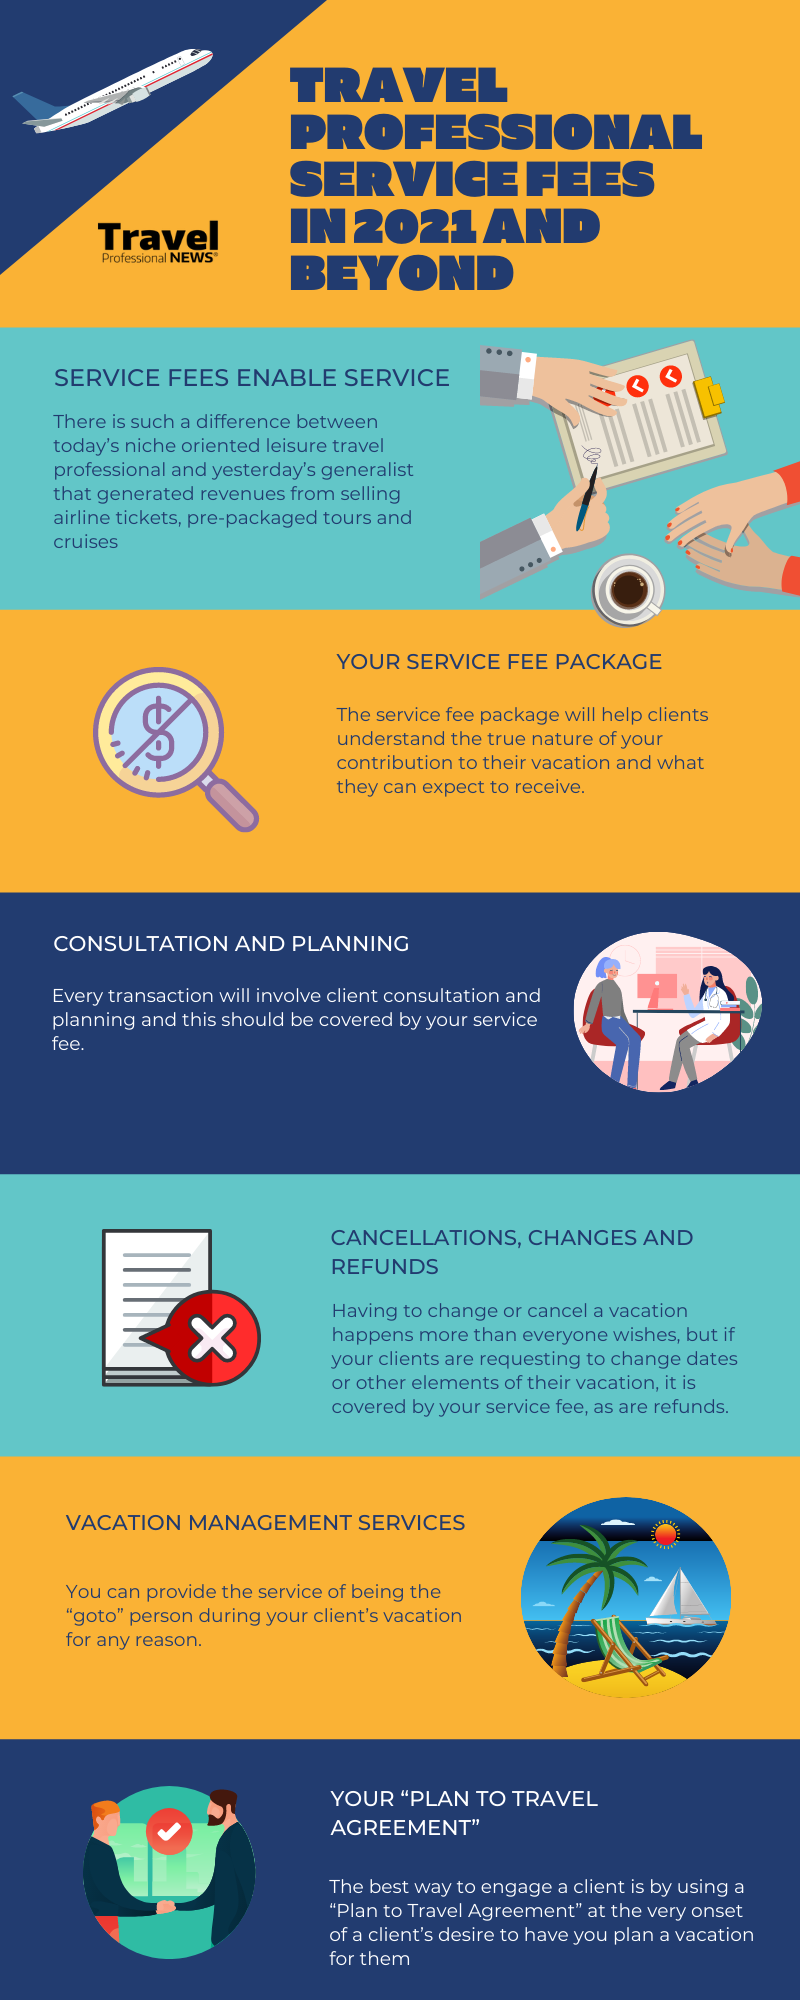 Travel Professional Service Fees in 2021 and Beyond (Infographic) 